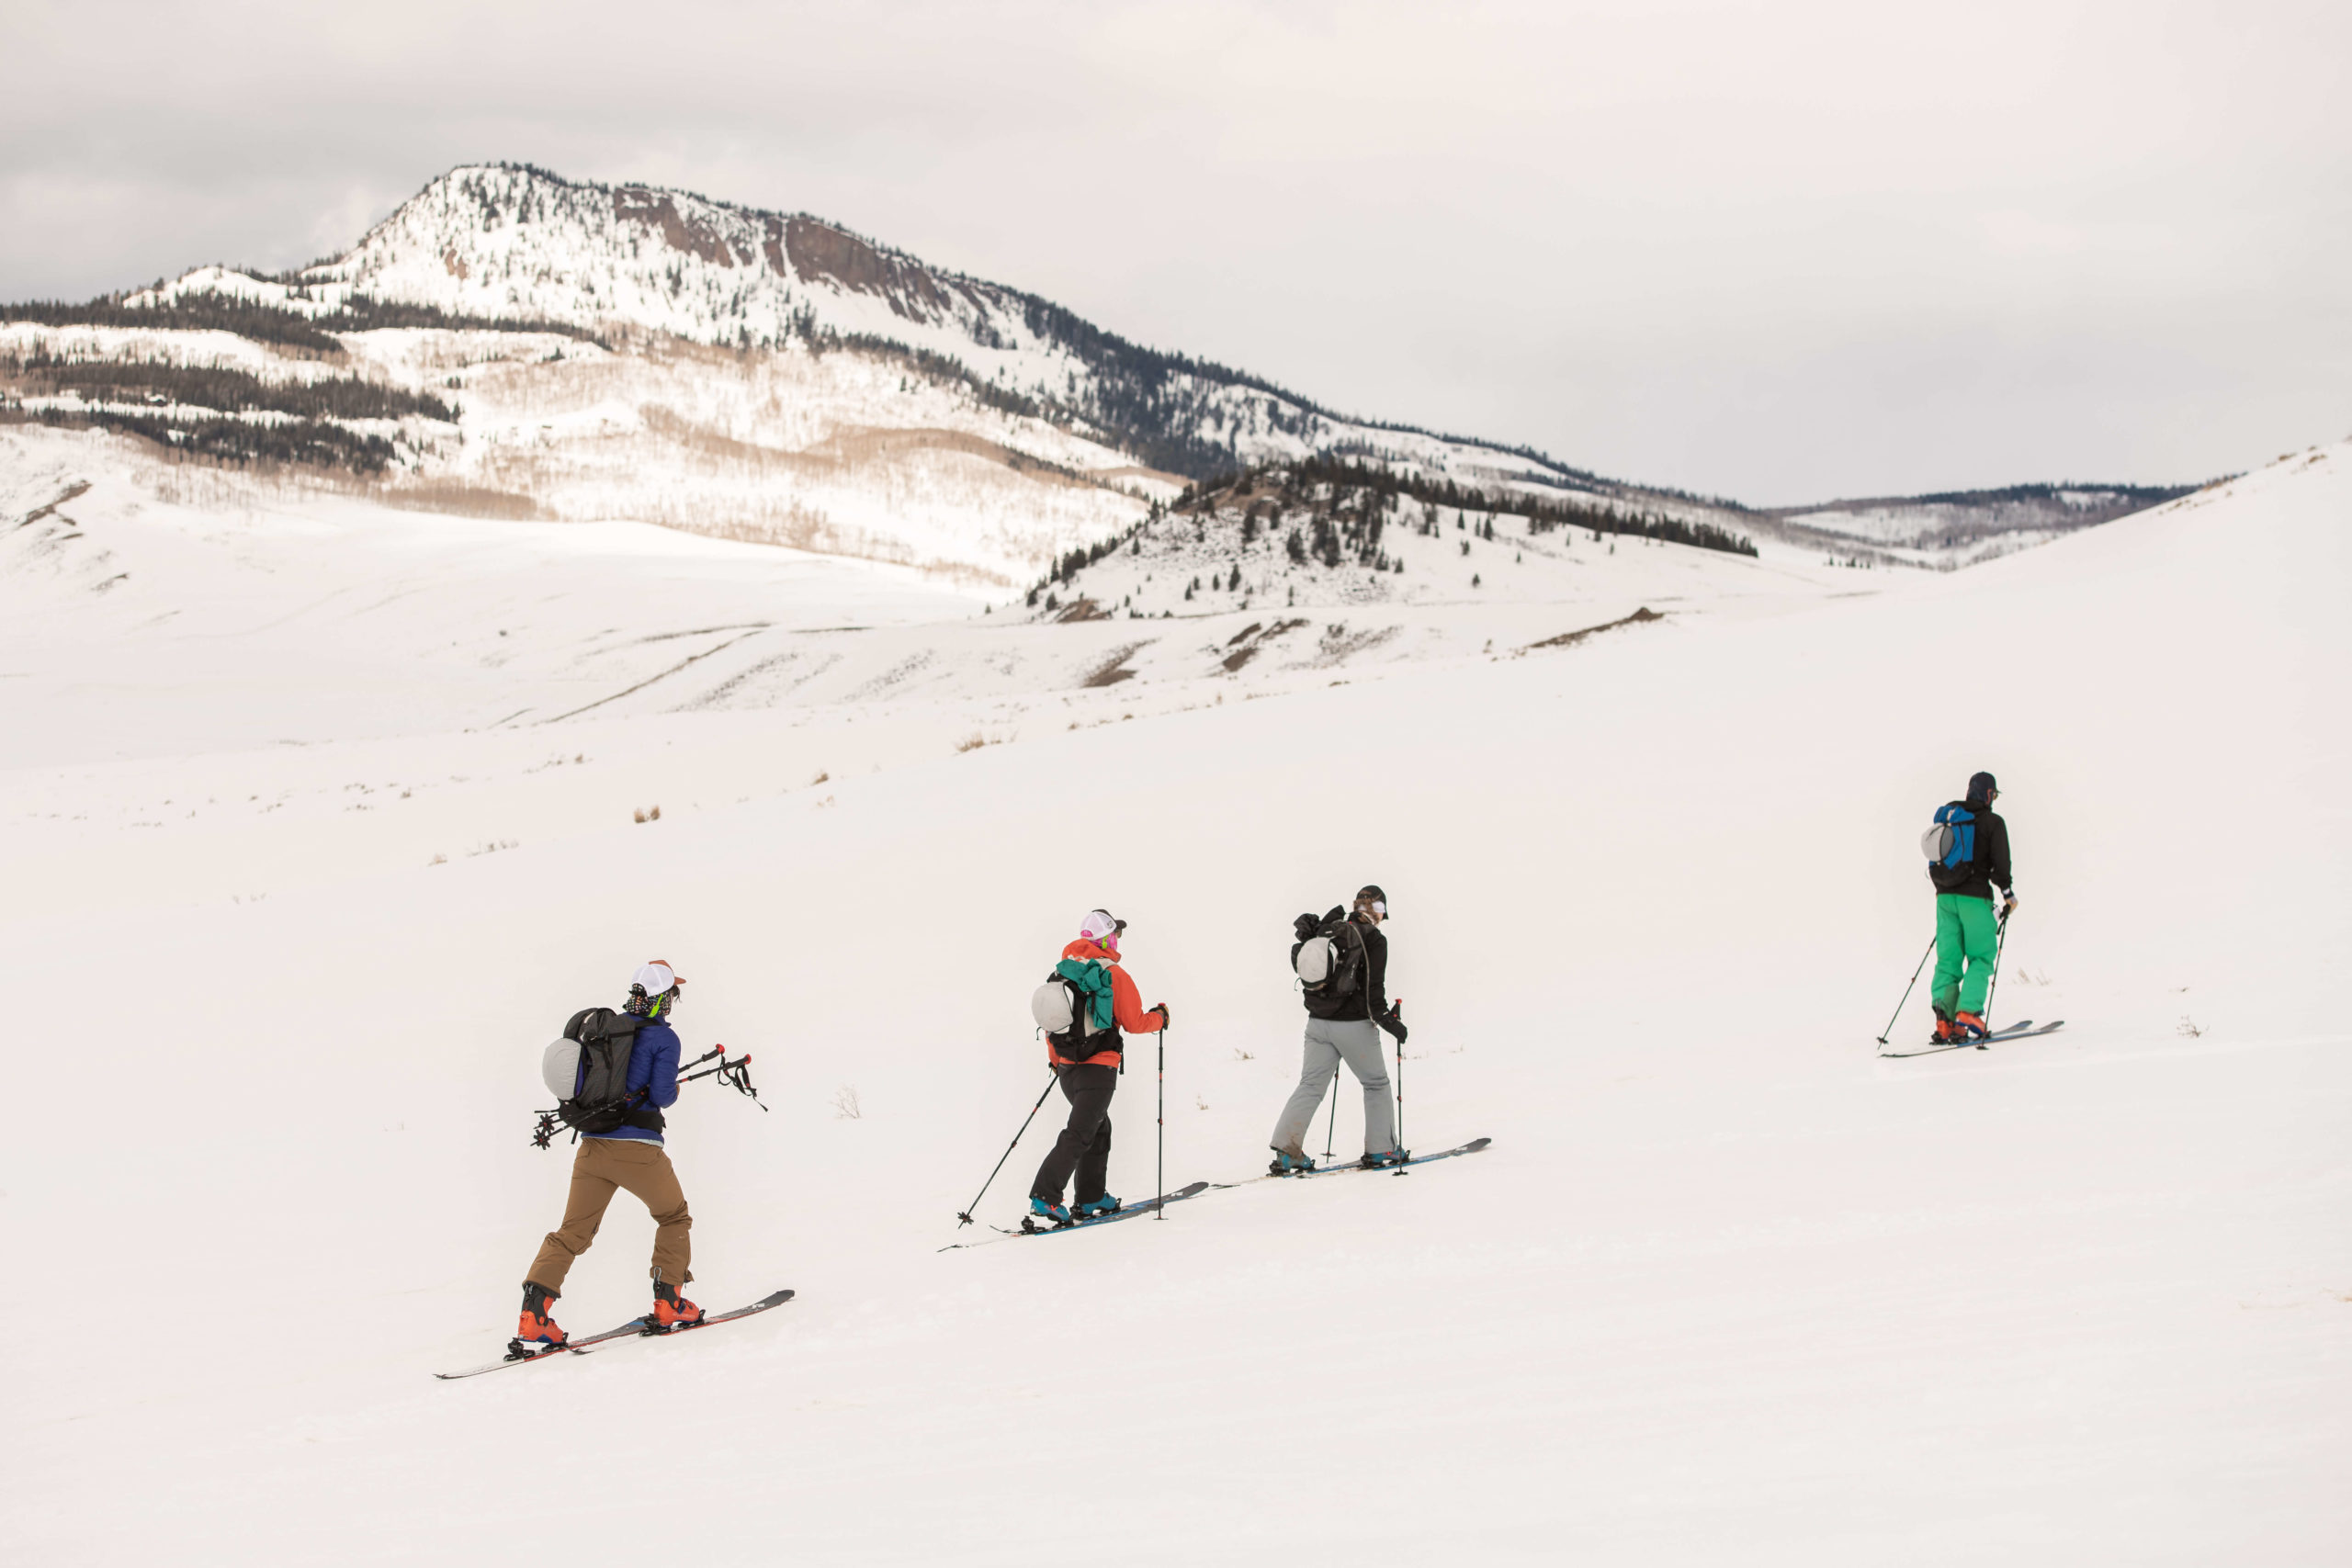 Four backcountry skiers skin up a slope outside Steamboat Springs, CO.